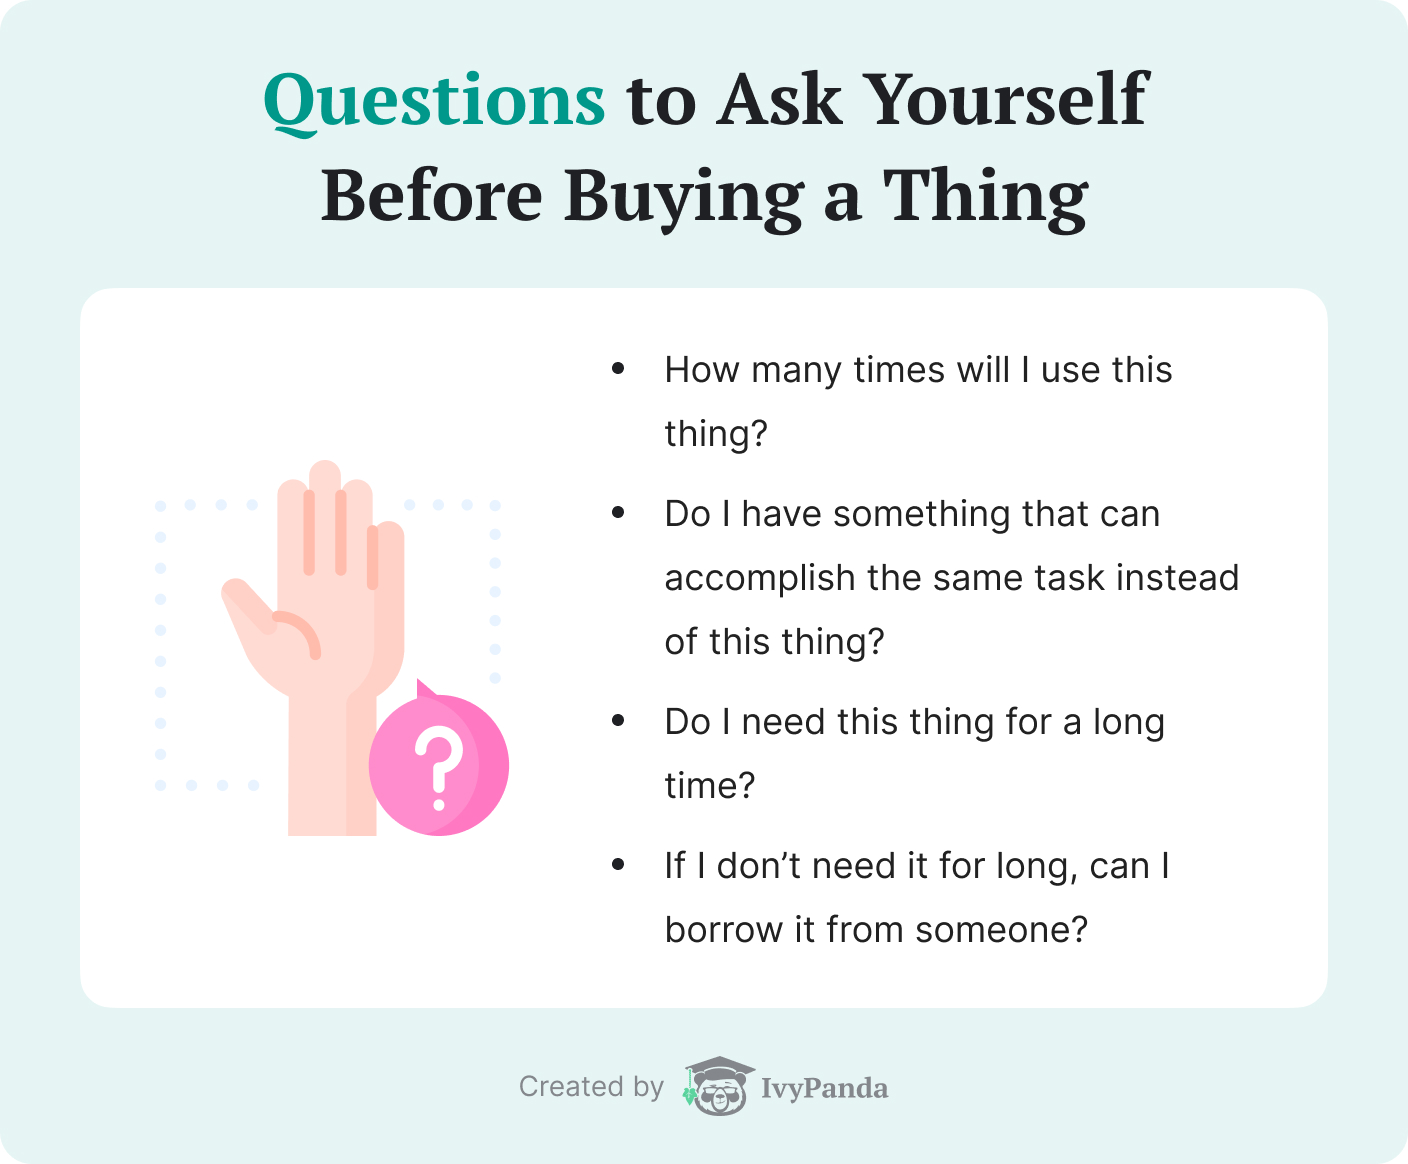 Questions to ask yourself before buying a thing.